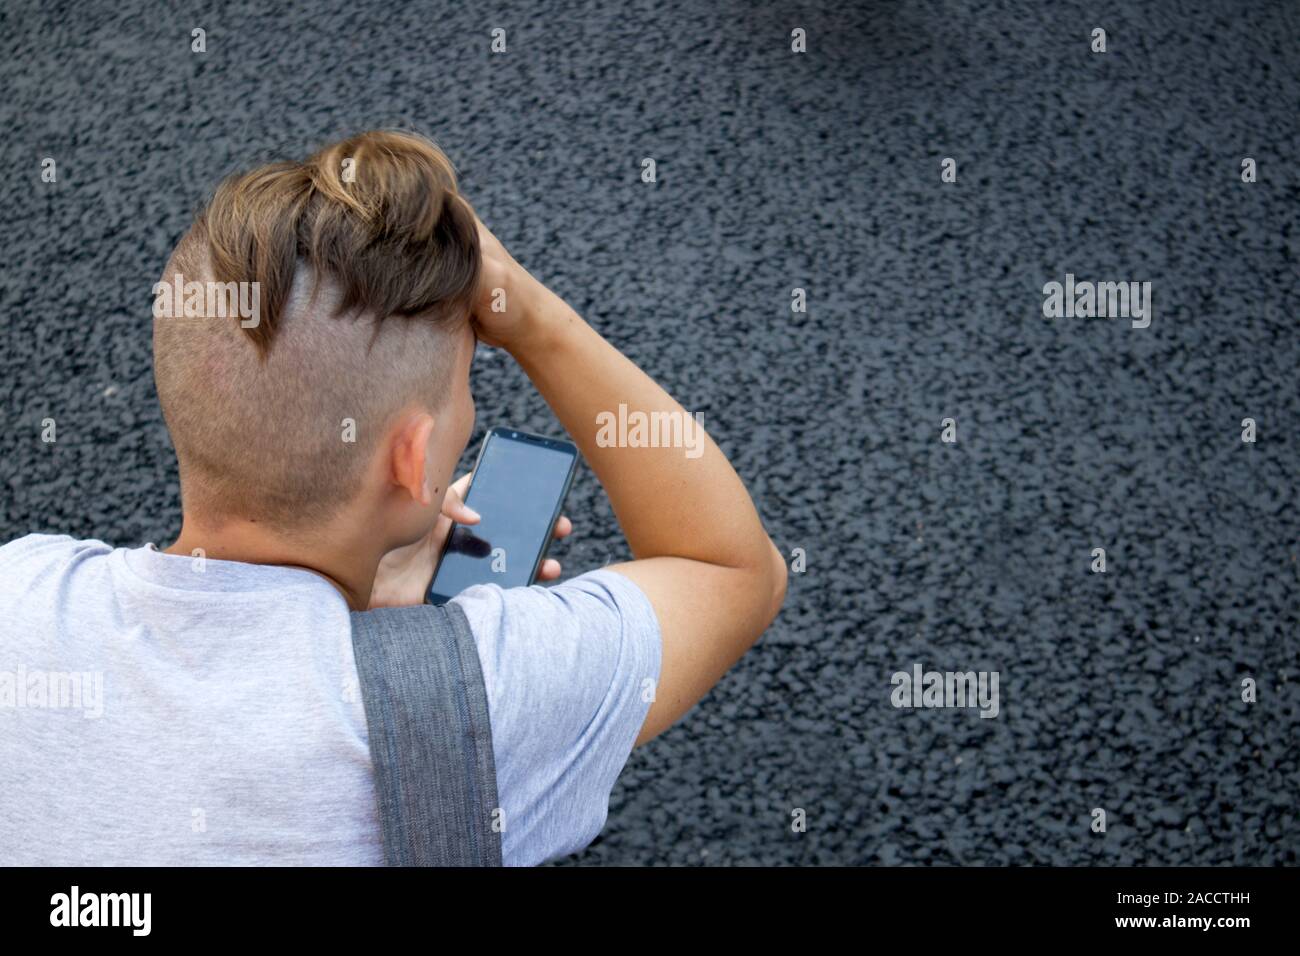 Back of shaved head with pony tail of young man with smartphone against grey asphalt Stock Photo